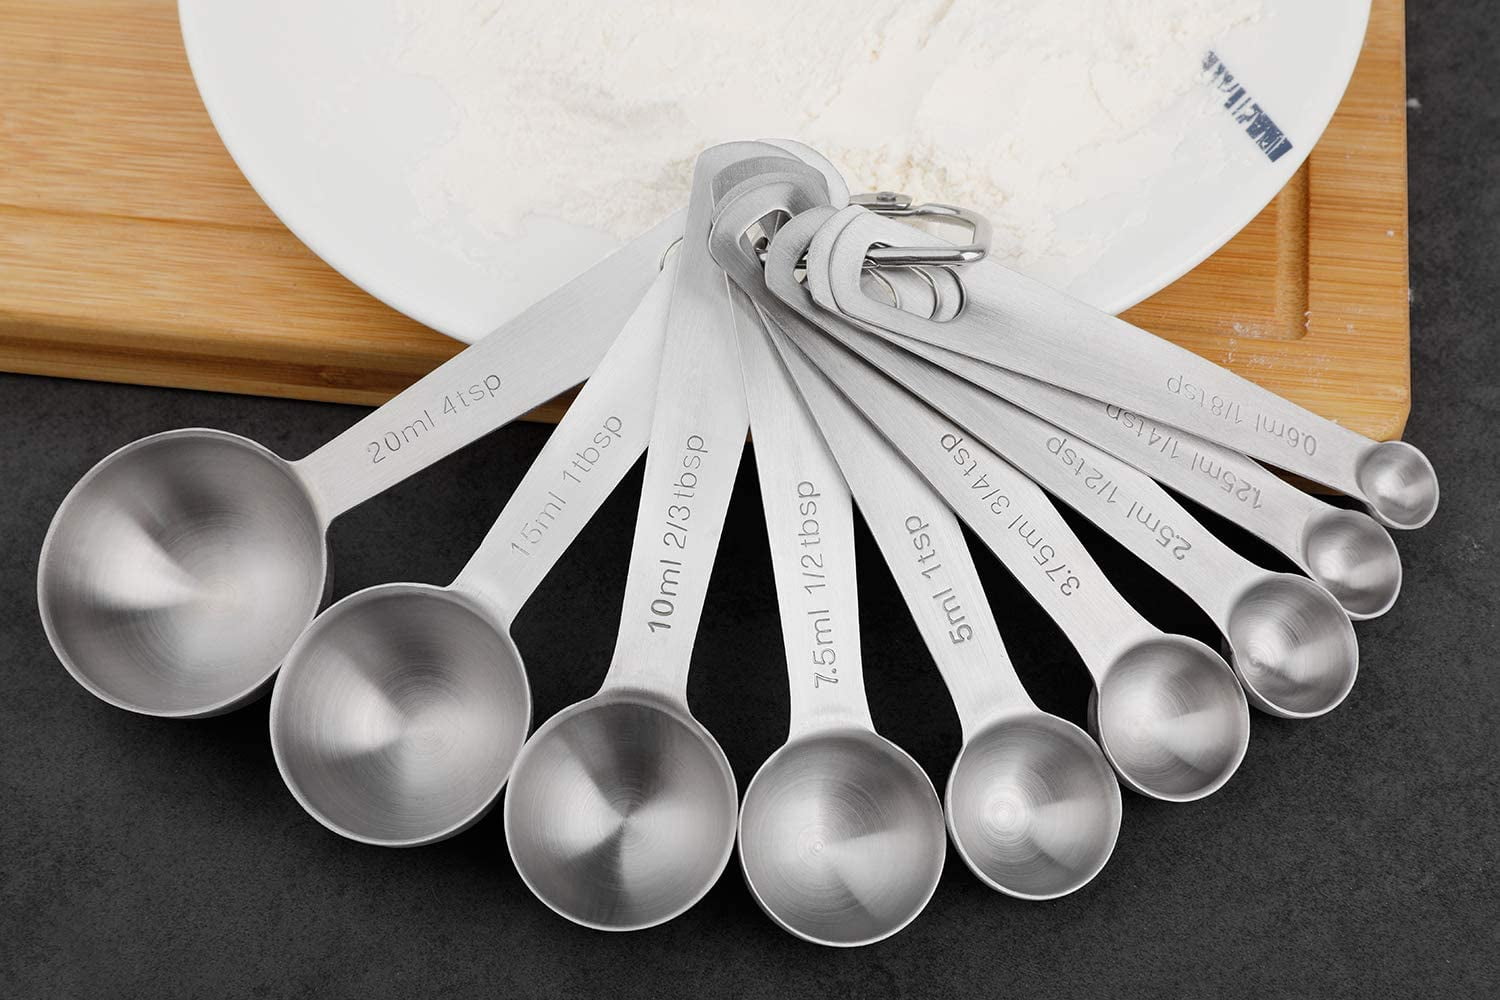 16 Piece Stainless Steel Measuring Cups and Spoons Set